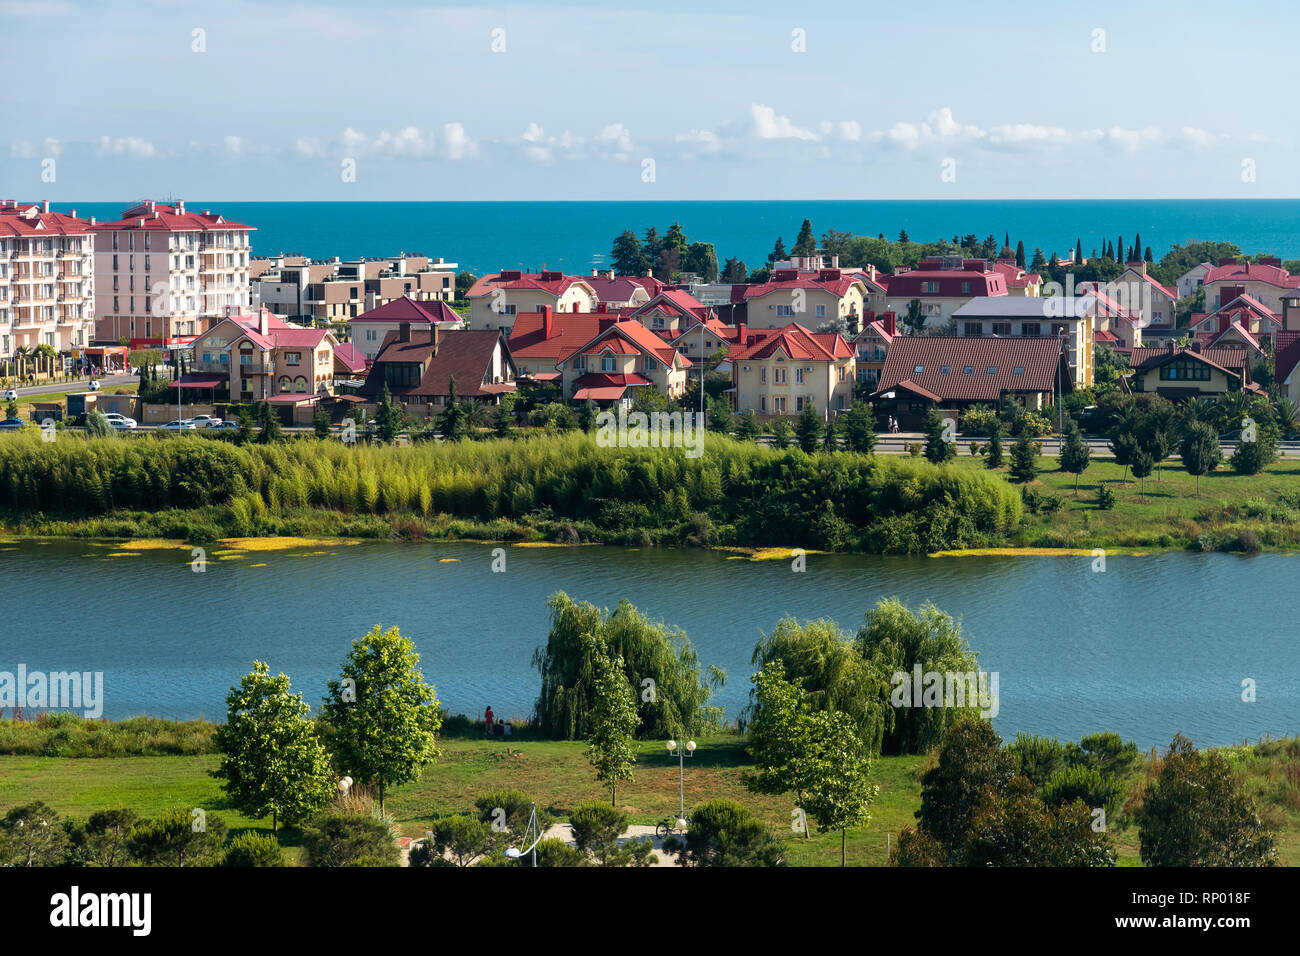 Cityscape in the Adler district of Sochi in Russia. Resort Stock Photo